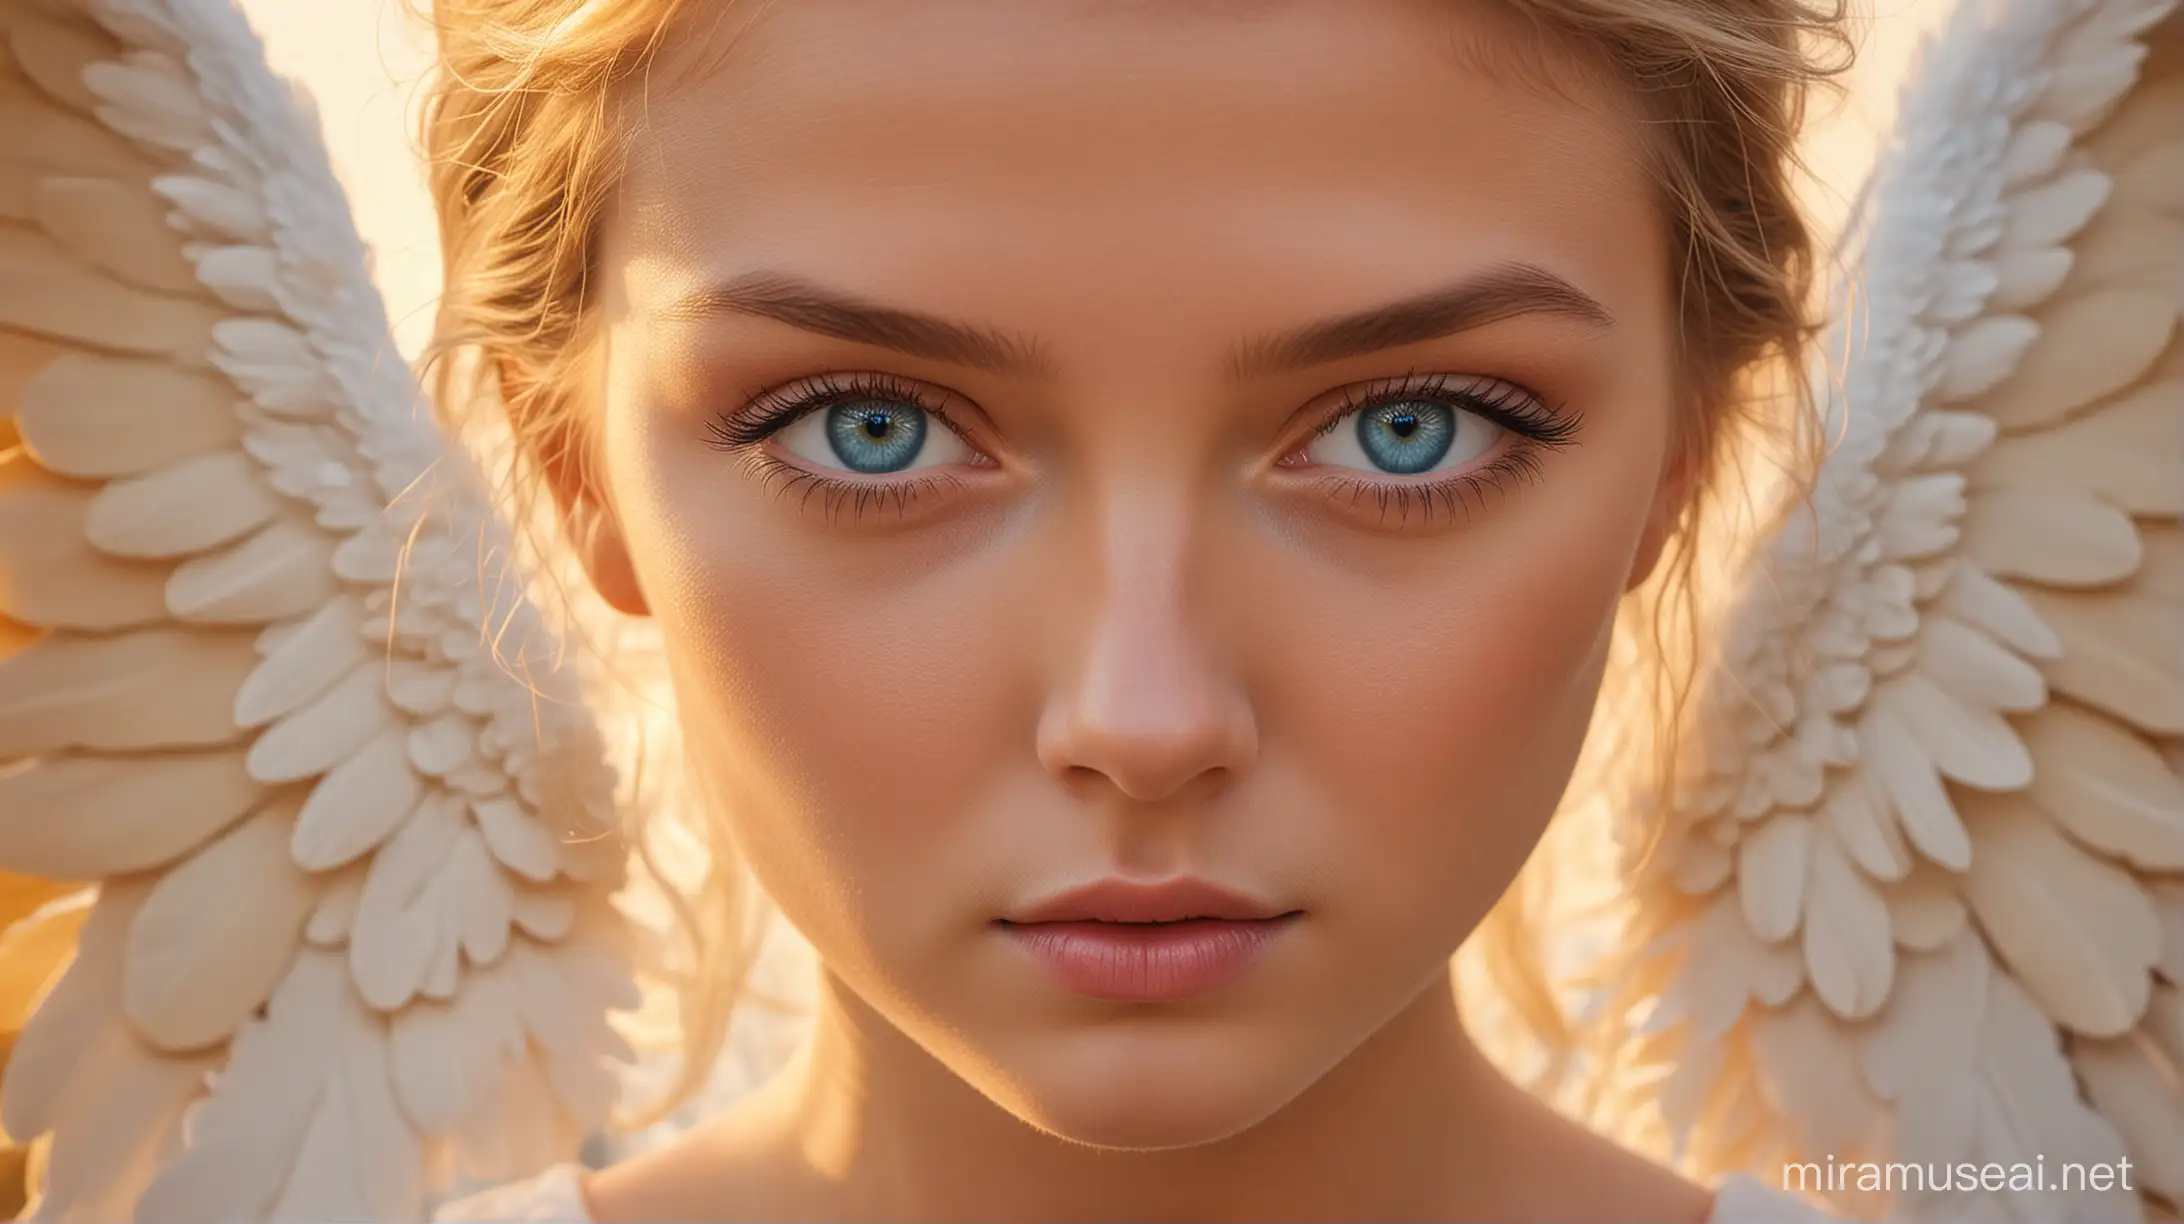 Close-up, angel with blue eyes, hd, realistic, Mystery Scene, Golden Hour Photography, warm color palette, Symmetrical
color